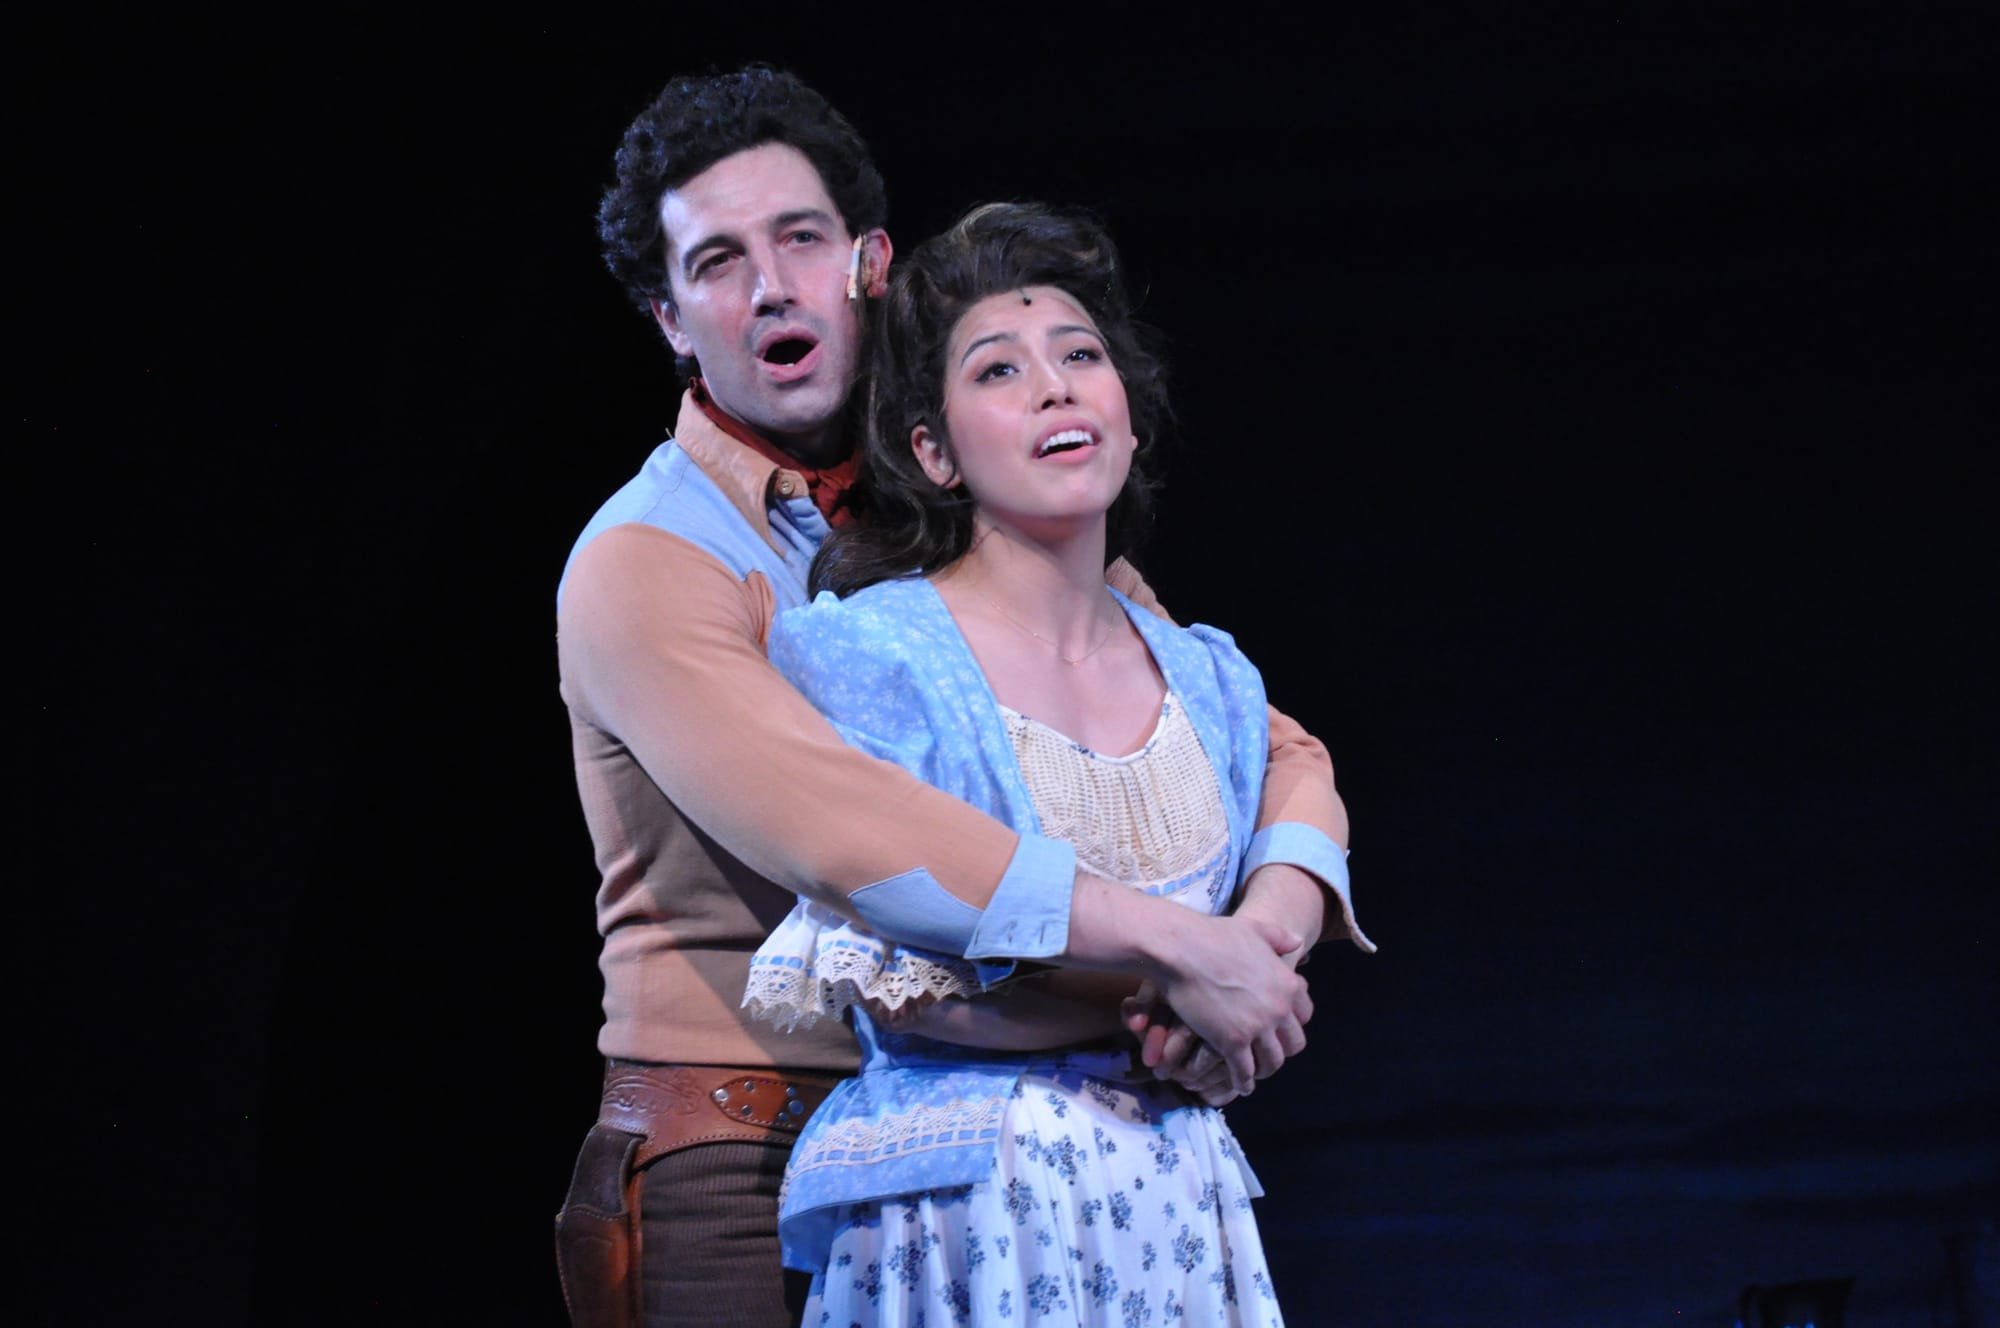 "Oklahoma!" - by Rodgers and Hammerstein - Reagle Music Theatre (Waltham, MA.) - REVIEW